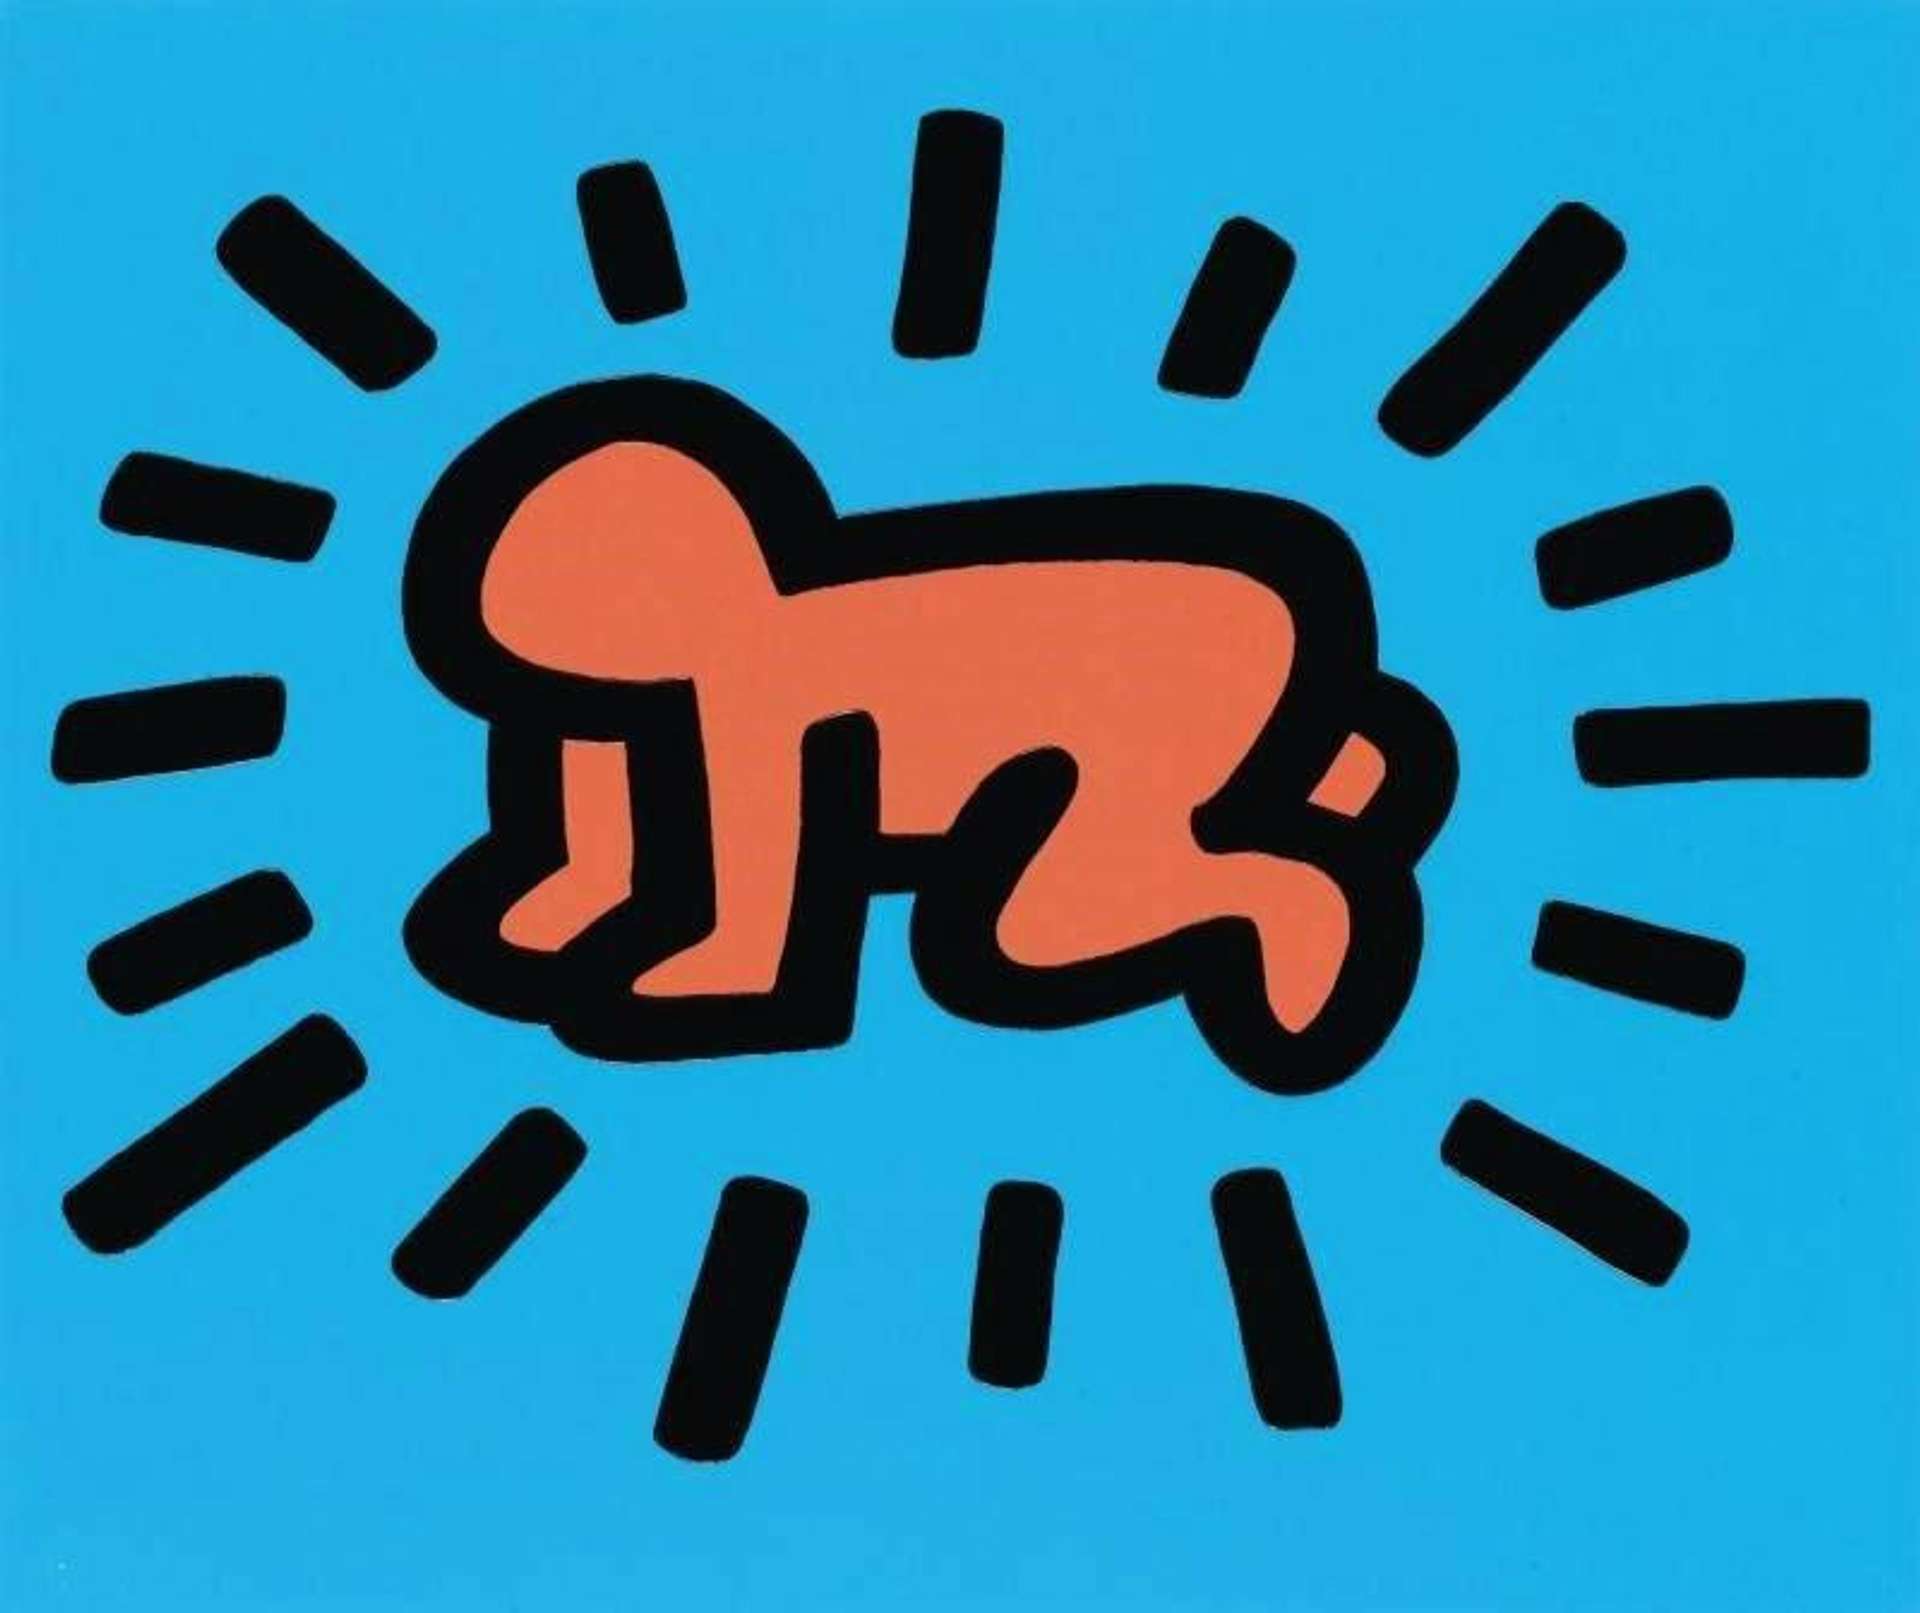 Radiant Baby - Signed Print by Keith Haring 1990 - MyArtBroker